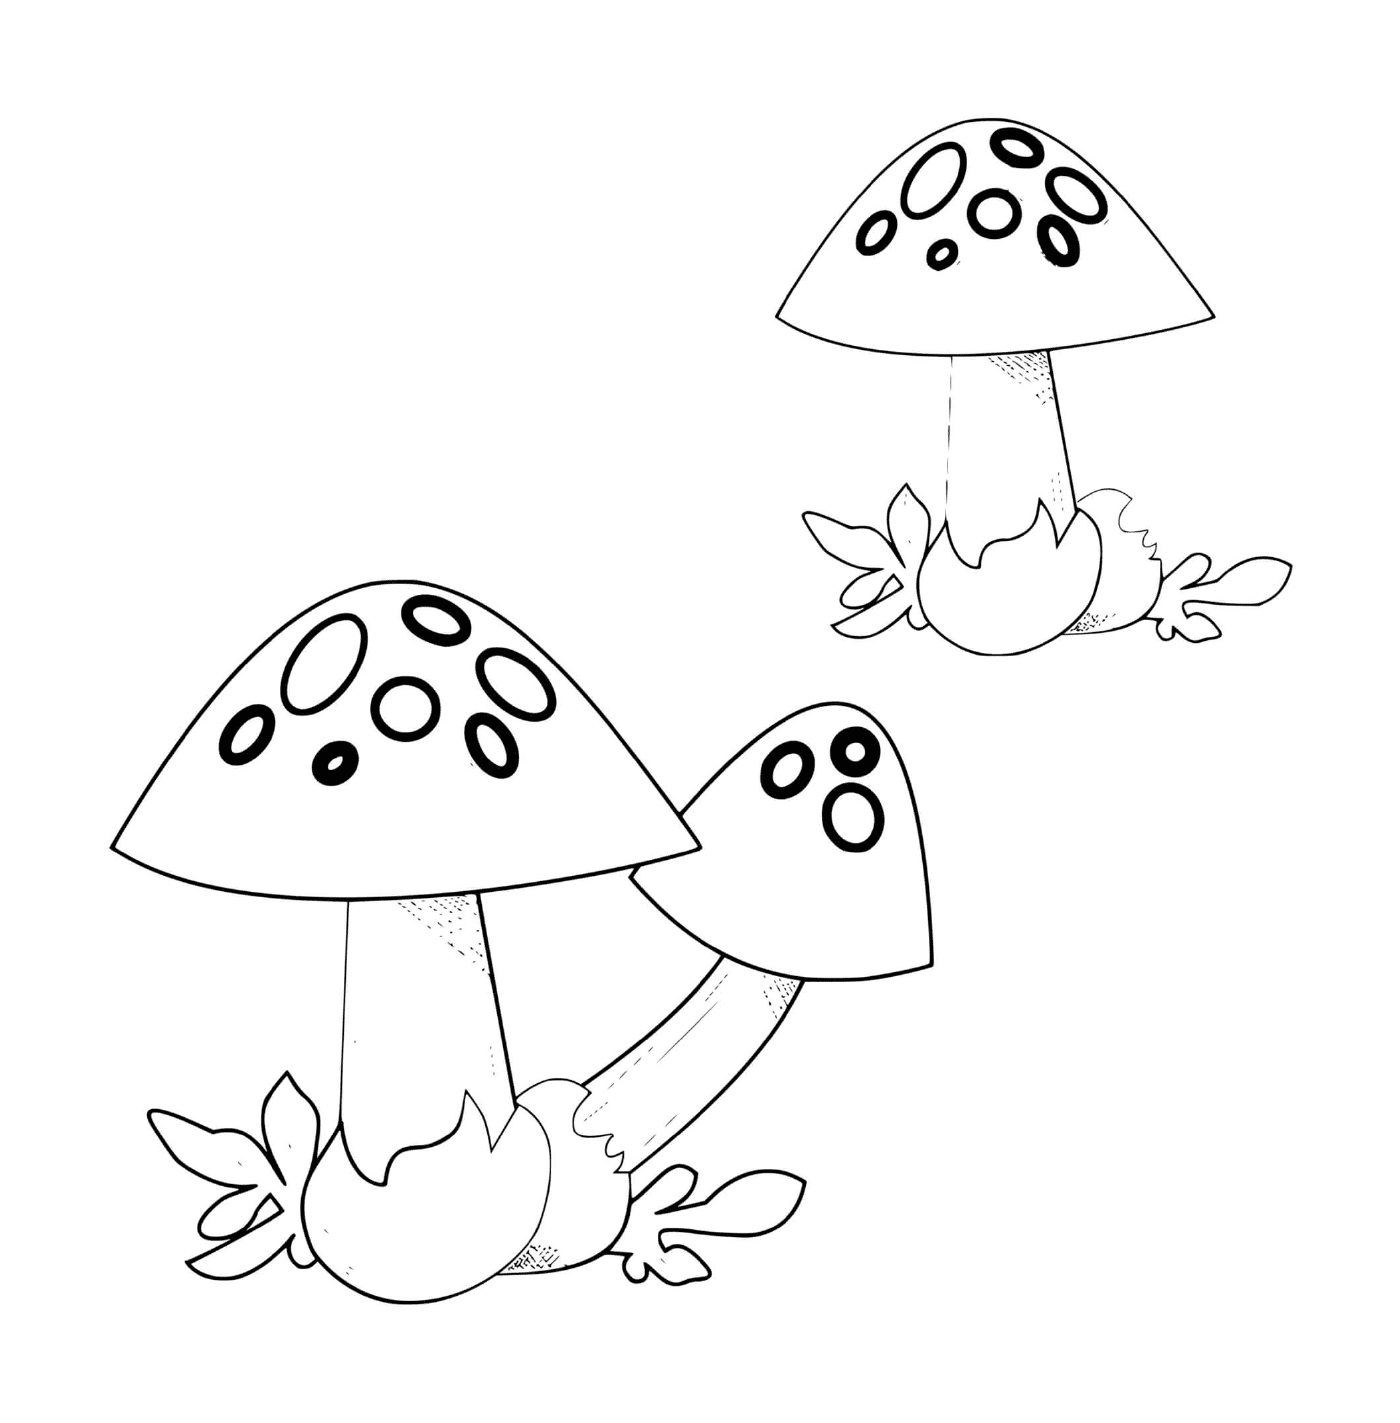  Two volvary mushrooms side by side 